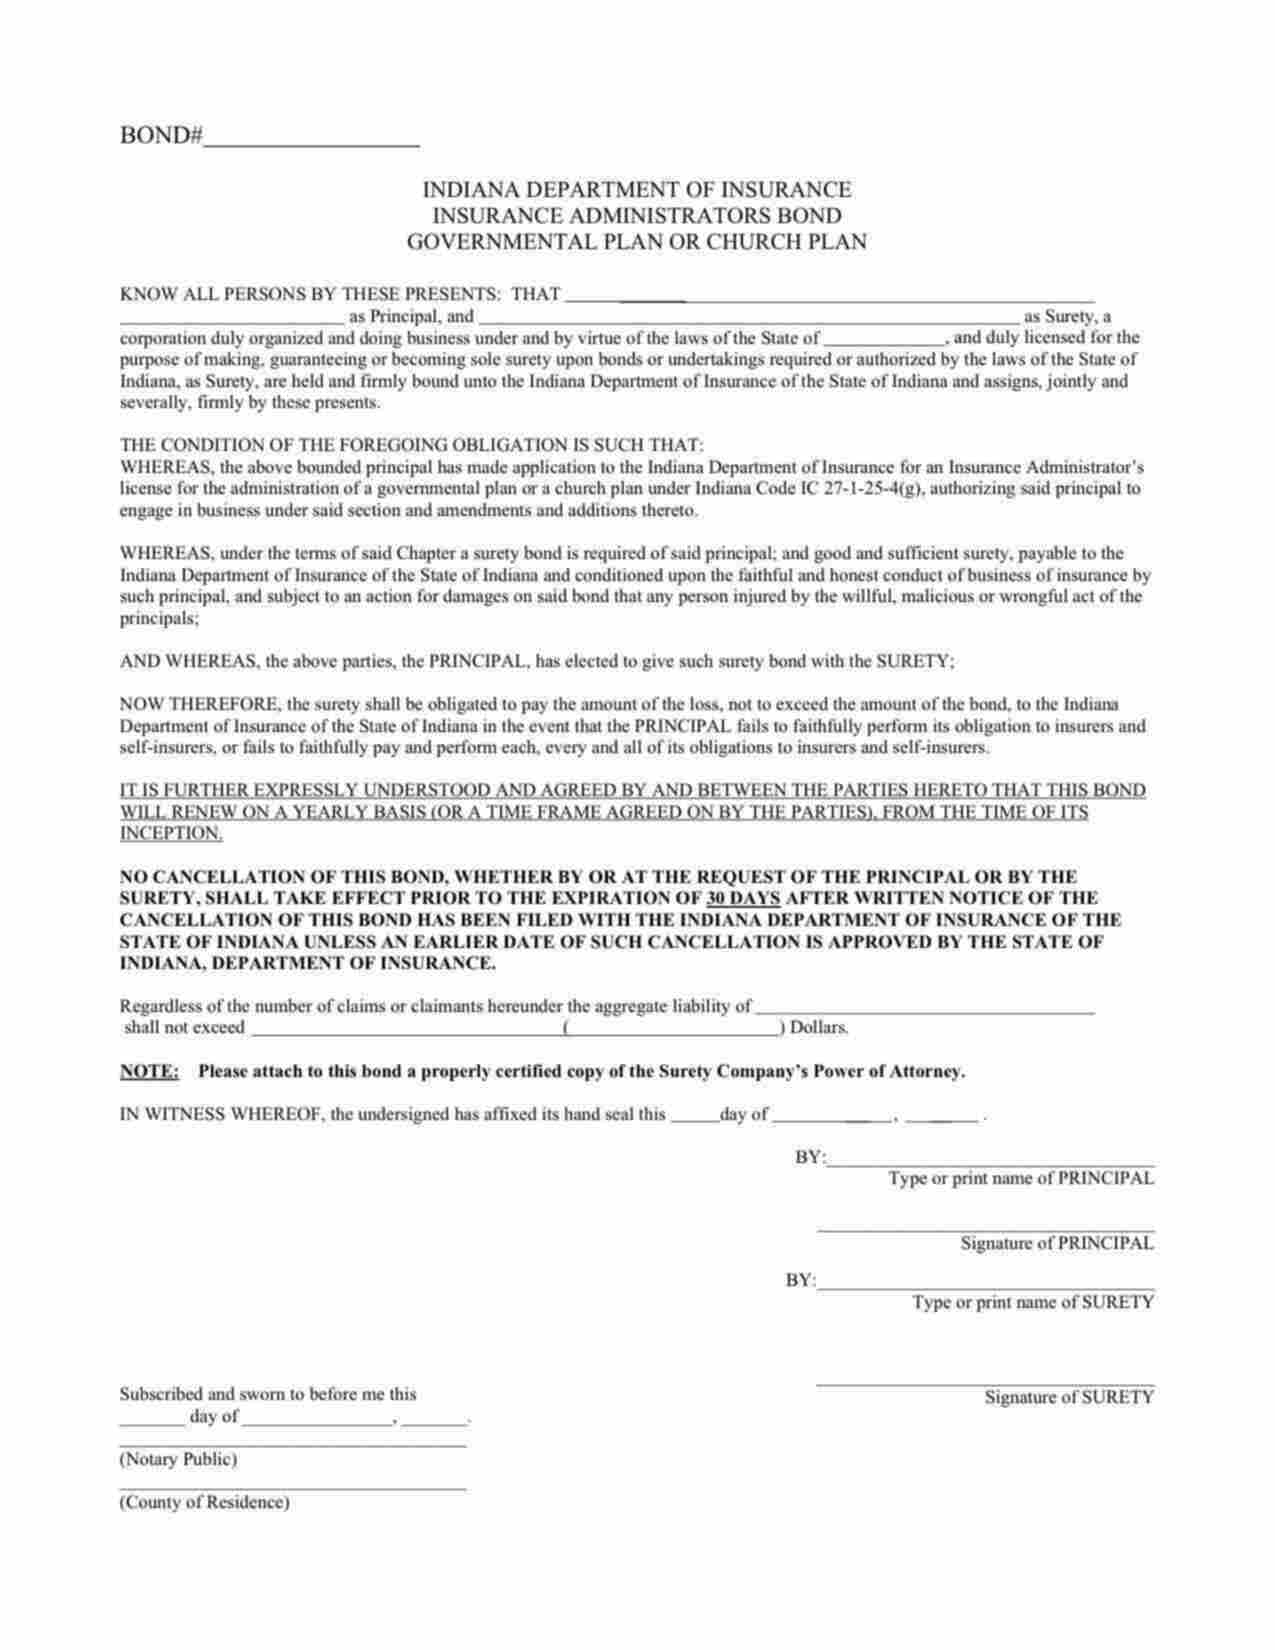 Indiana Administrator for Governmental or Church Plan Bond Form